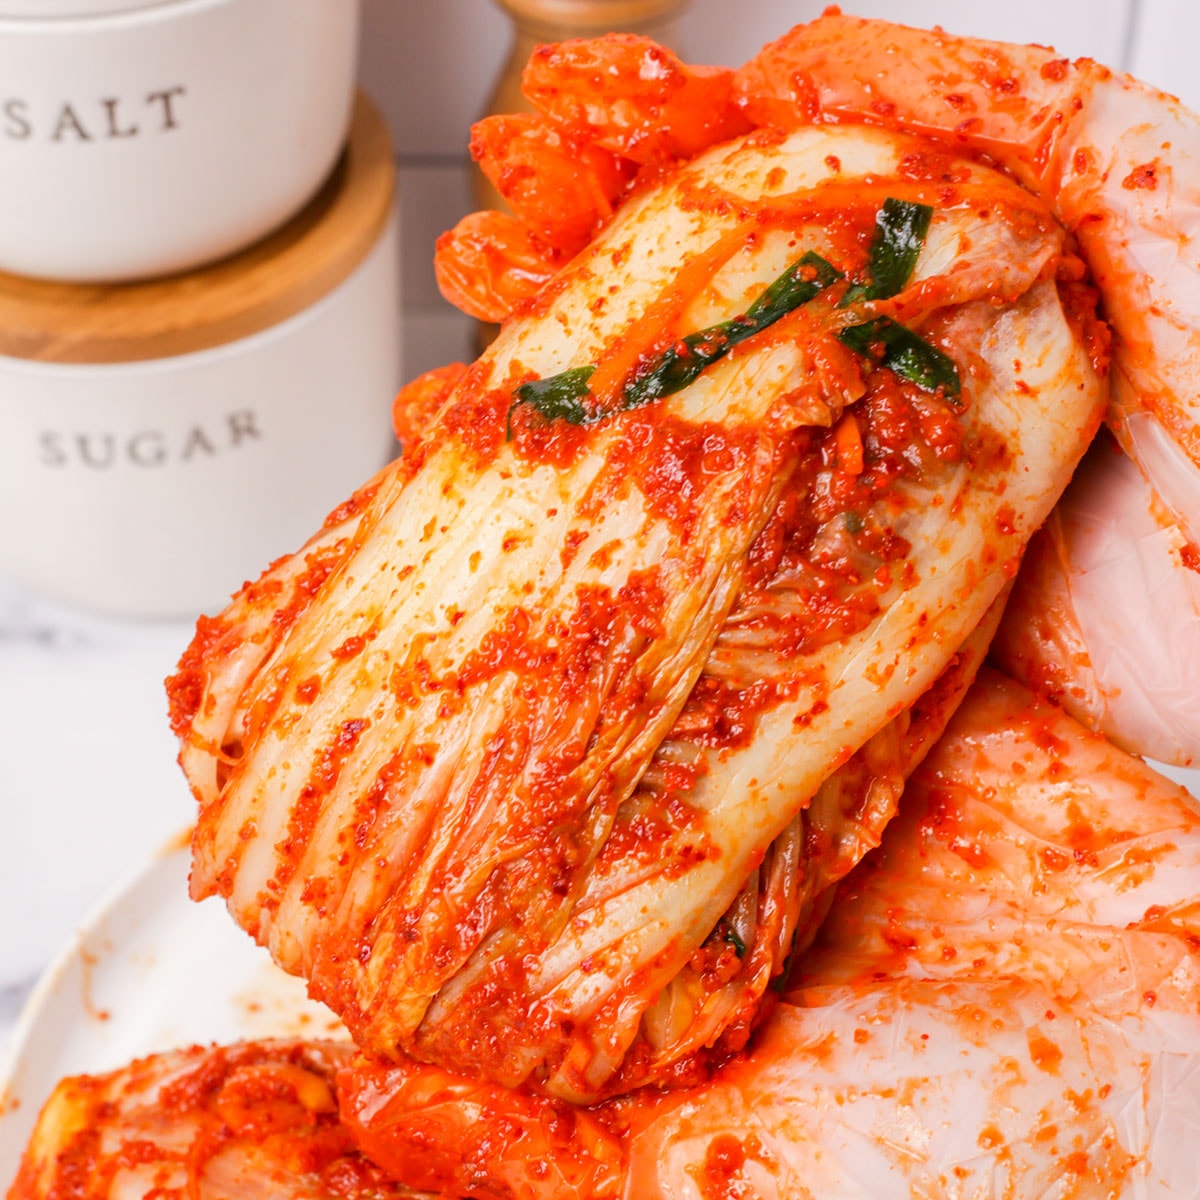 Does Kimchi Cause Bad Breath? How to Prevent and Get Rid of Kimchi